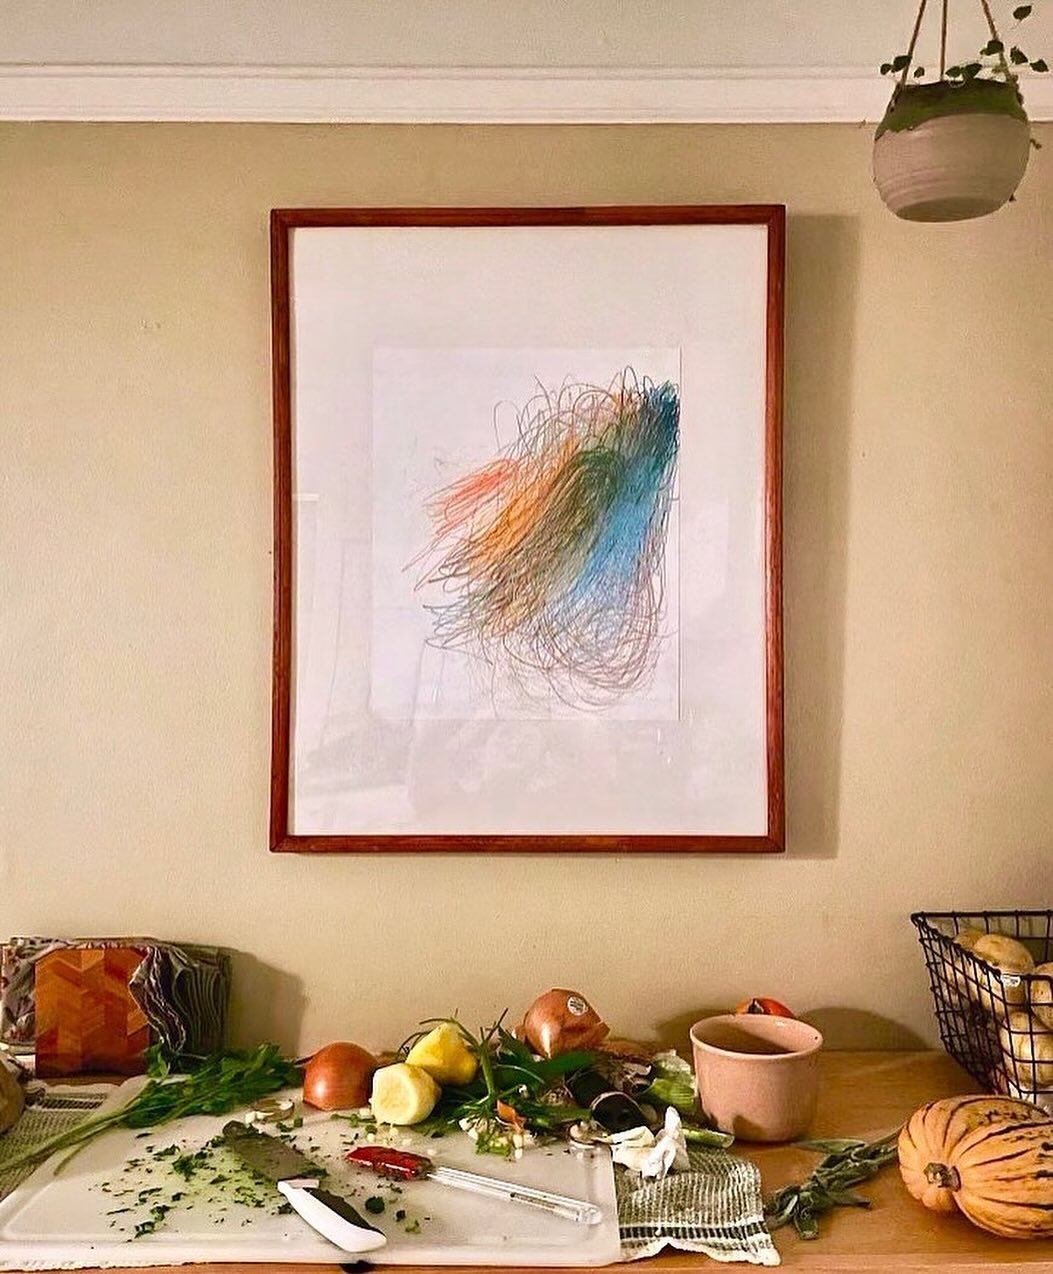 Few things make us happier than seeing artists&rsquo; work find the perfect forever home in your beautiful spaces. 

We will always love the way our friend @butternutblu framed this lovely Joni Smith drawing in their kitchen.

🔨 As a reminder, the w